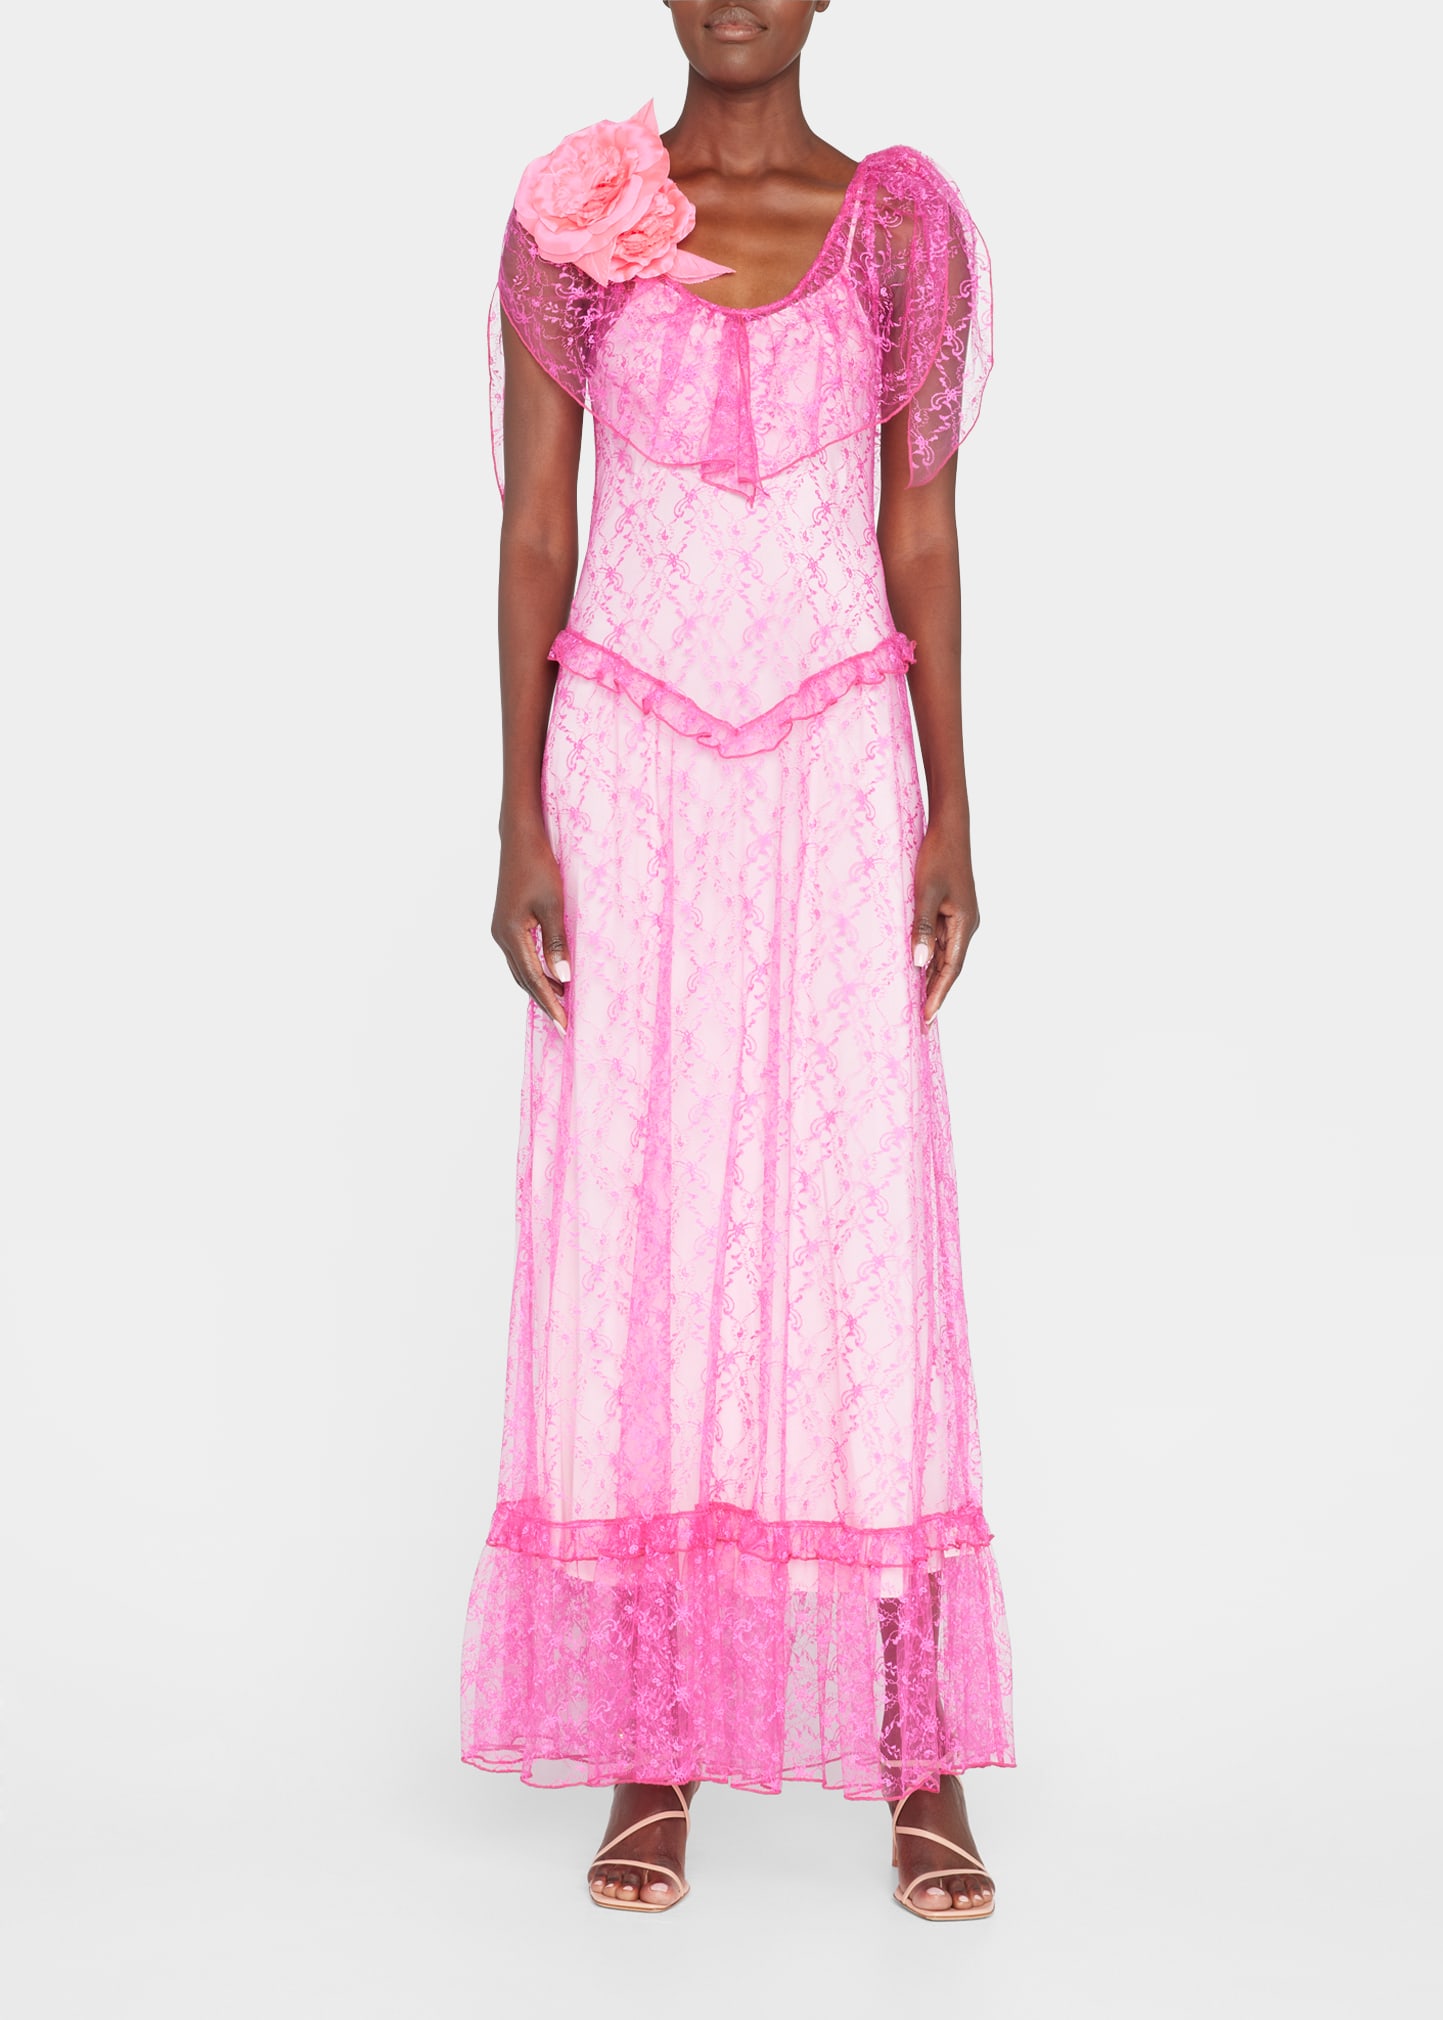 Floral Lace Ruffle-Trim Maxi Dress with Flower